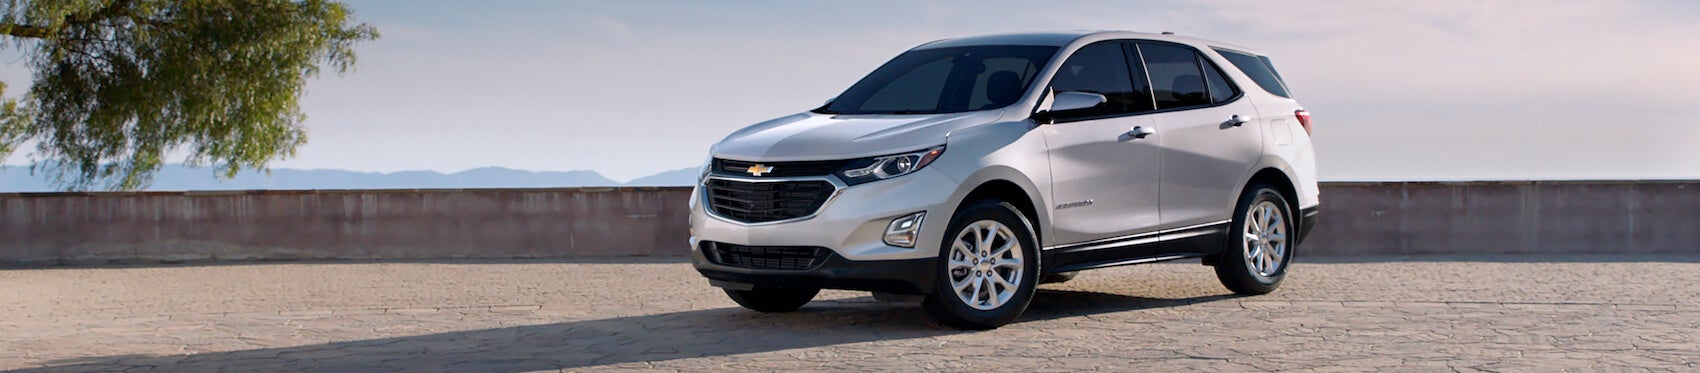 Chevy Equinox for sale near Riverton, WY